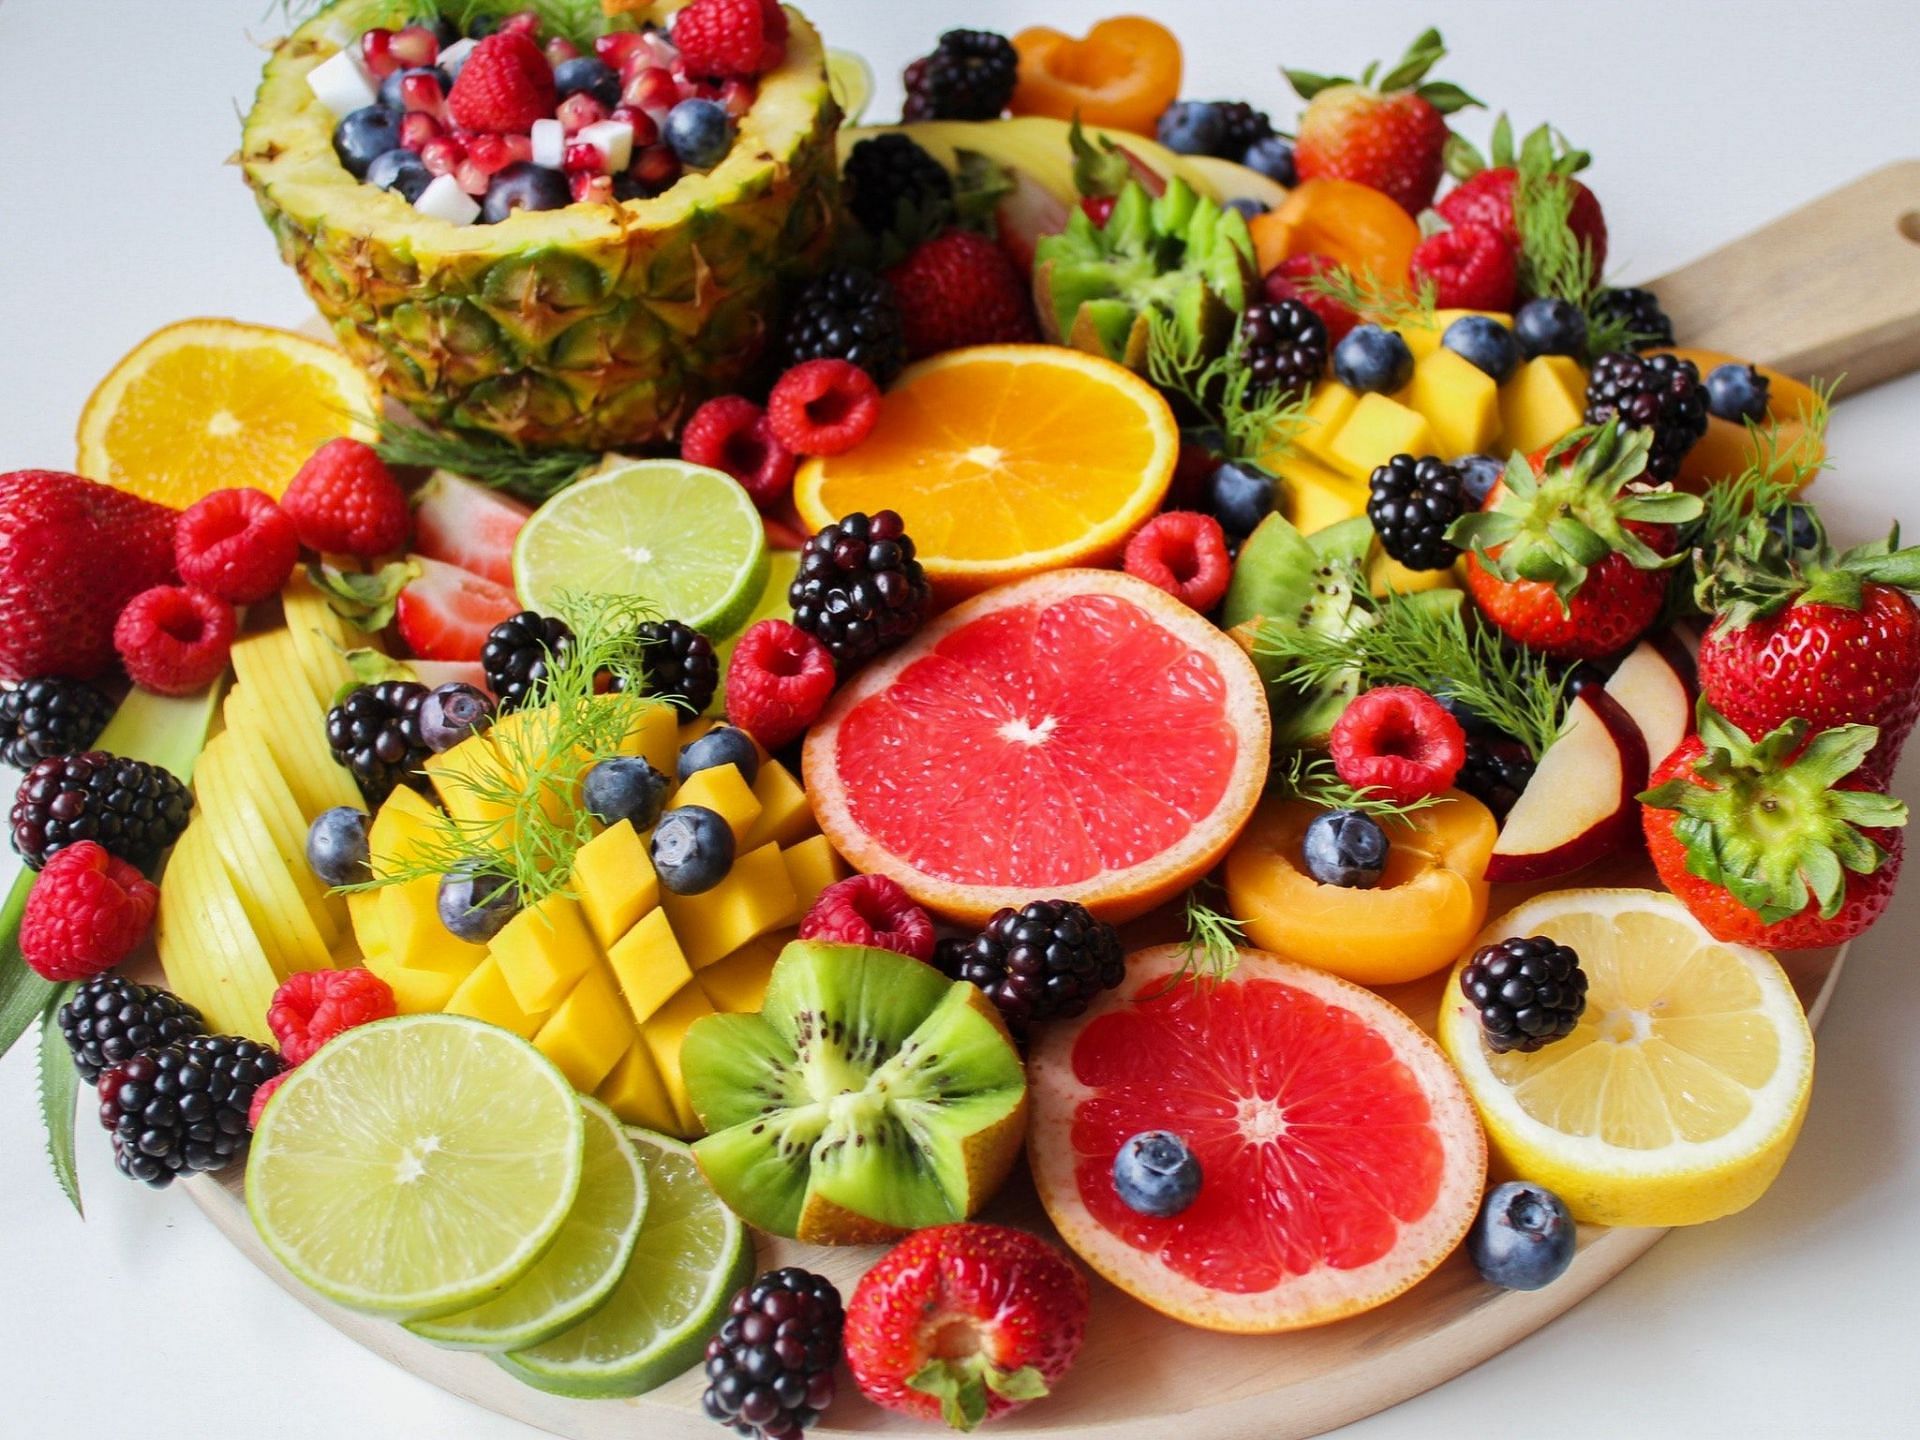 Fruits as a Source of Vitamins for Cancer Prevention (Image via Pexels)